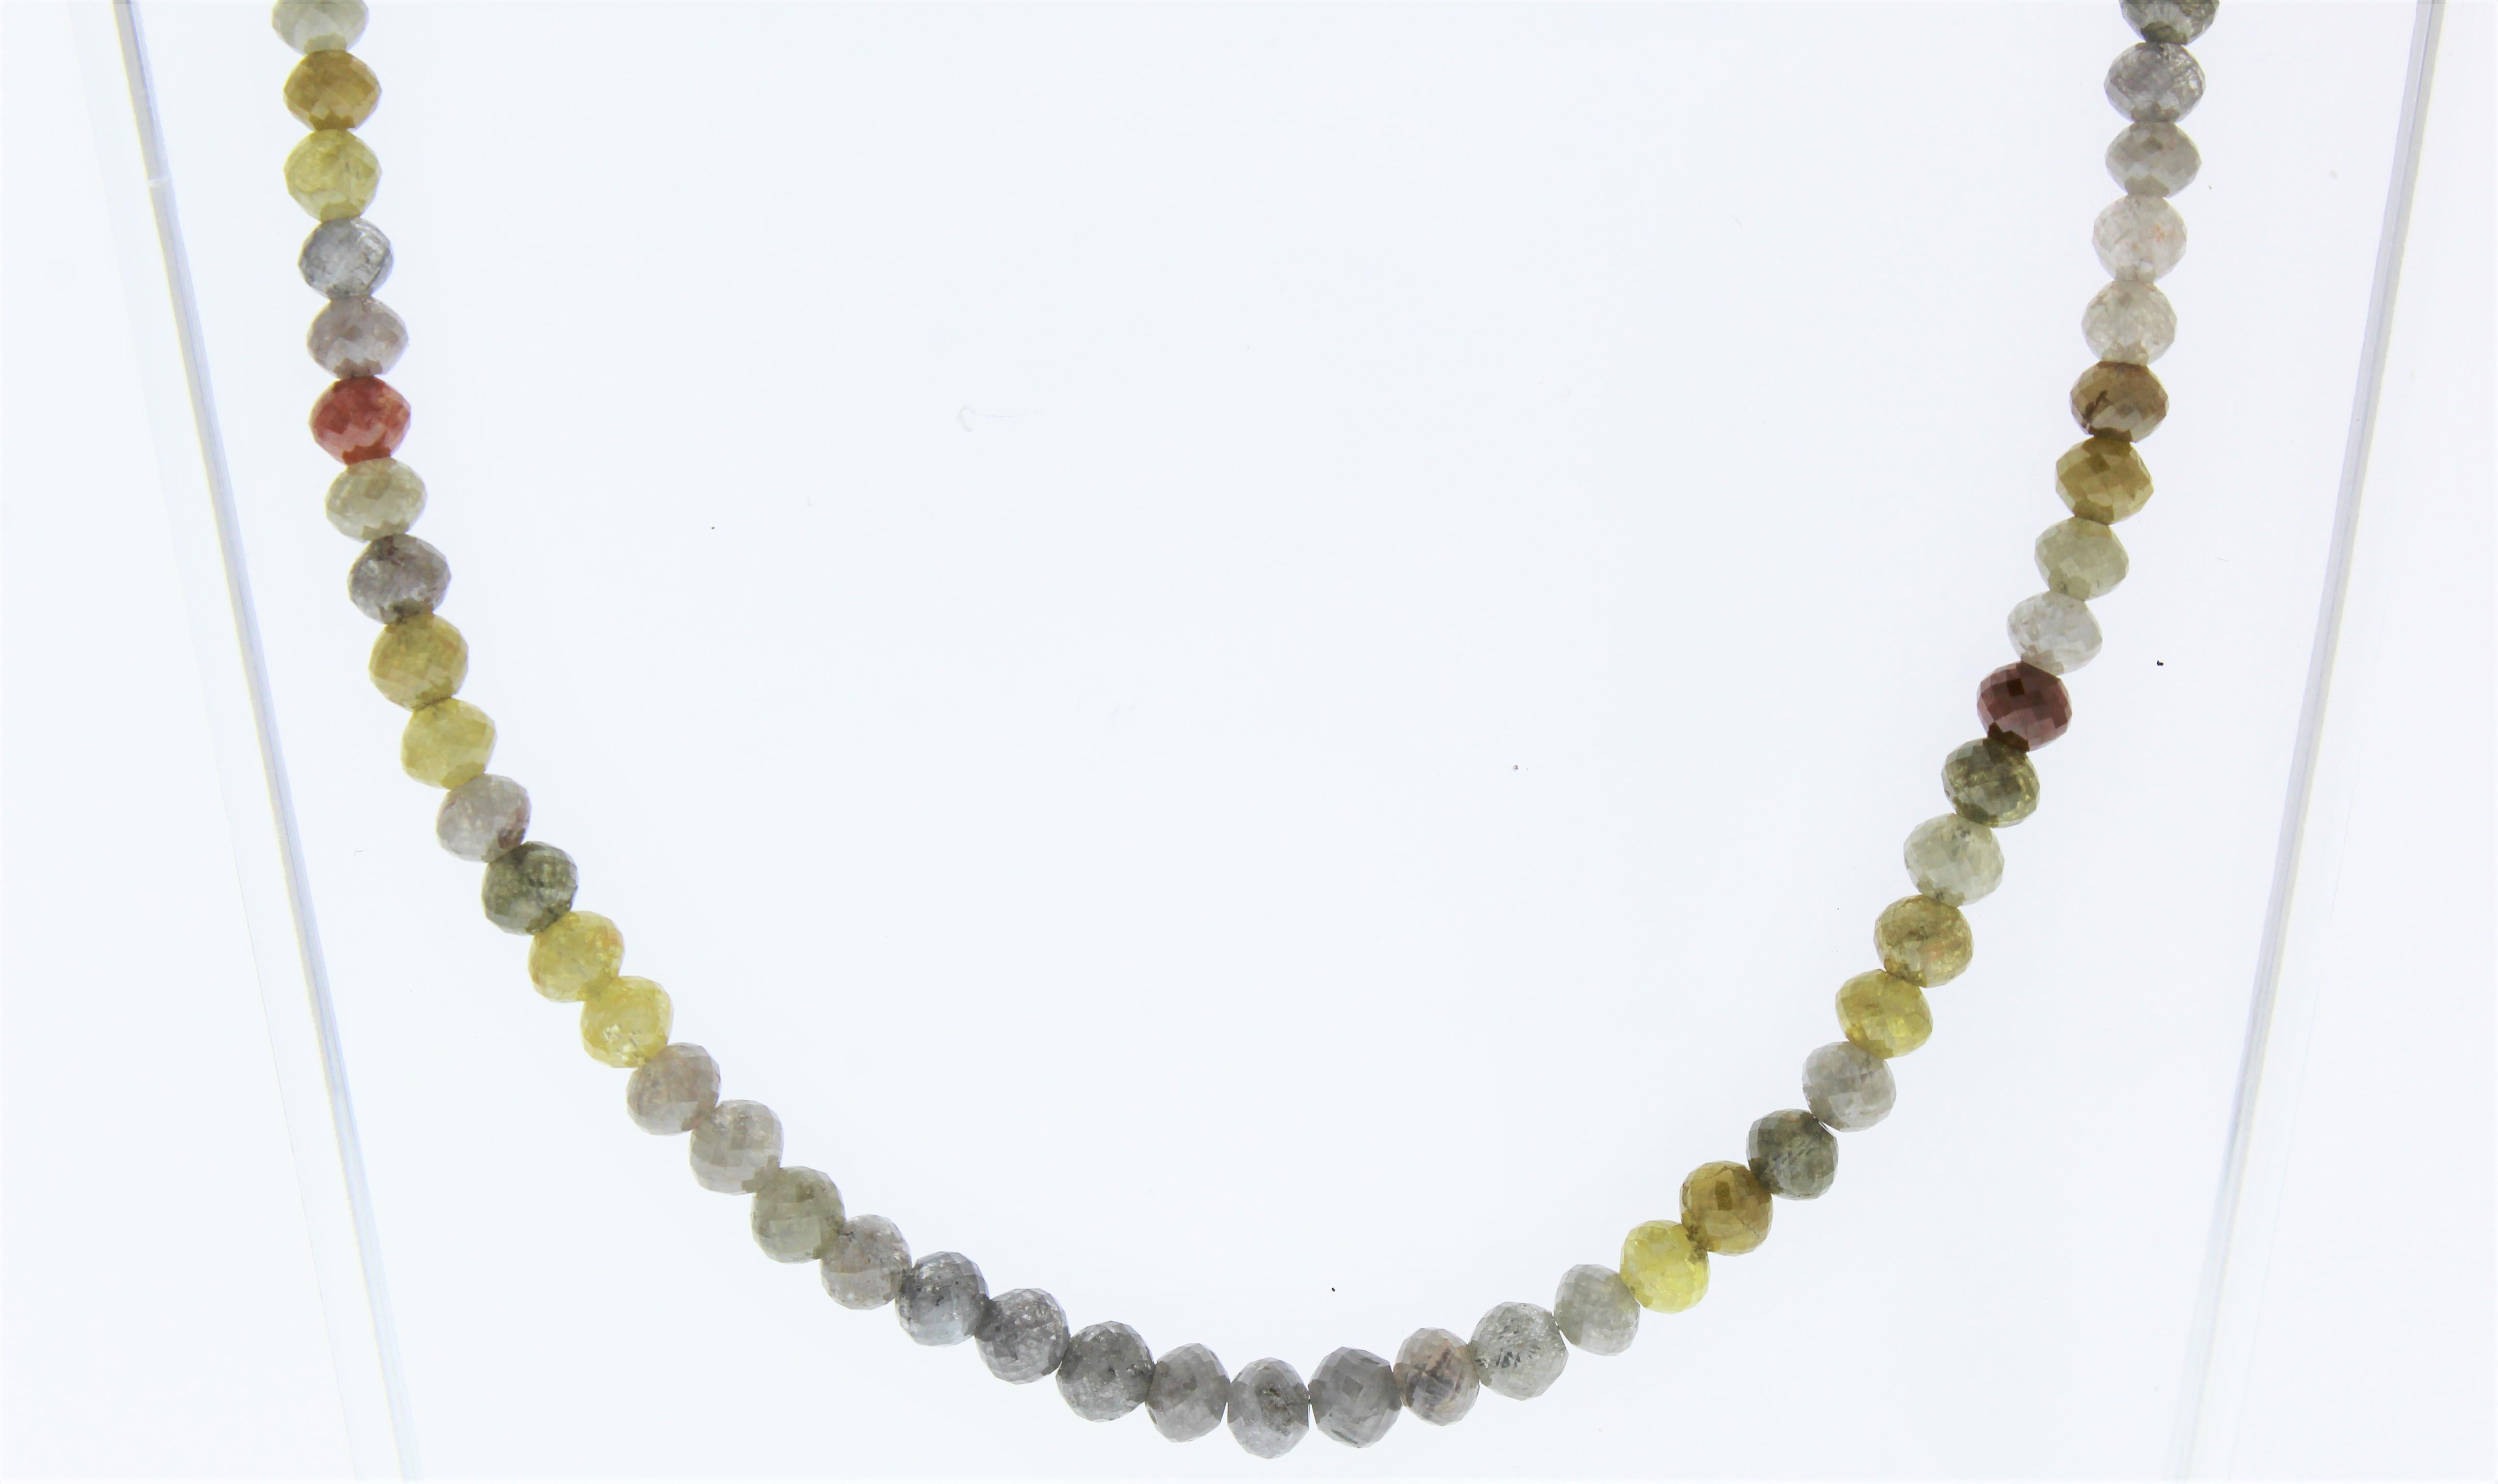 This necklace is a dramatic strand of 131 multi color round faceted bead diamonds totaling 59.30 carats. Slim in design and perfect for layering alongside other necklaces and chains, this multi color diamond necklace is sure to get noticed.